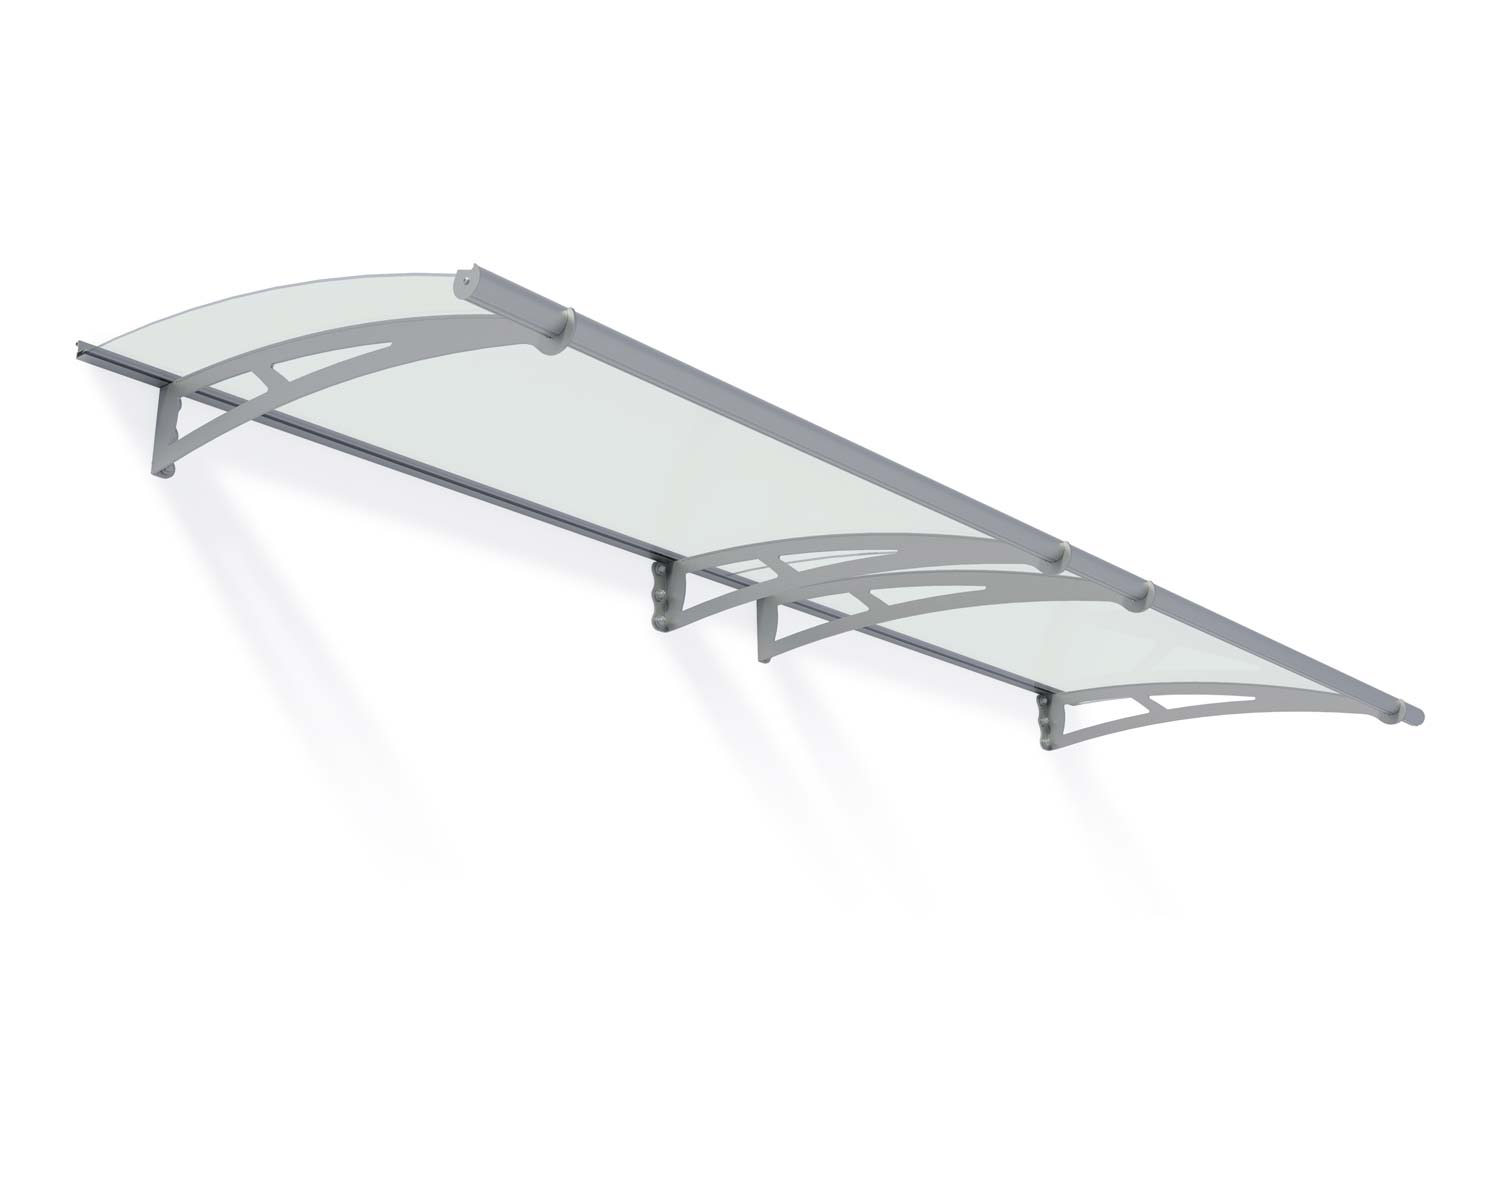 Door Awning Capella 3 ft. x 10 ft Silver Structure & Frost Glazing